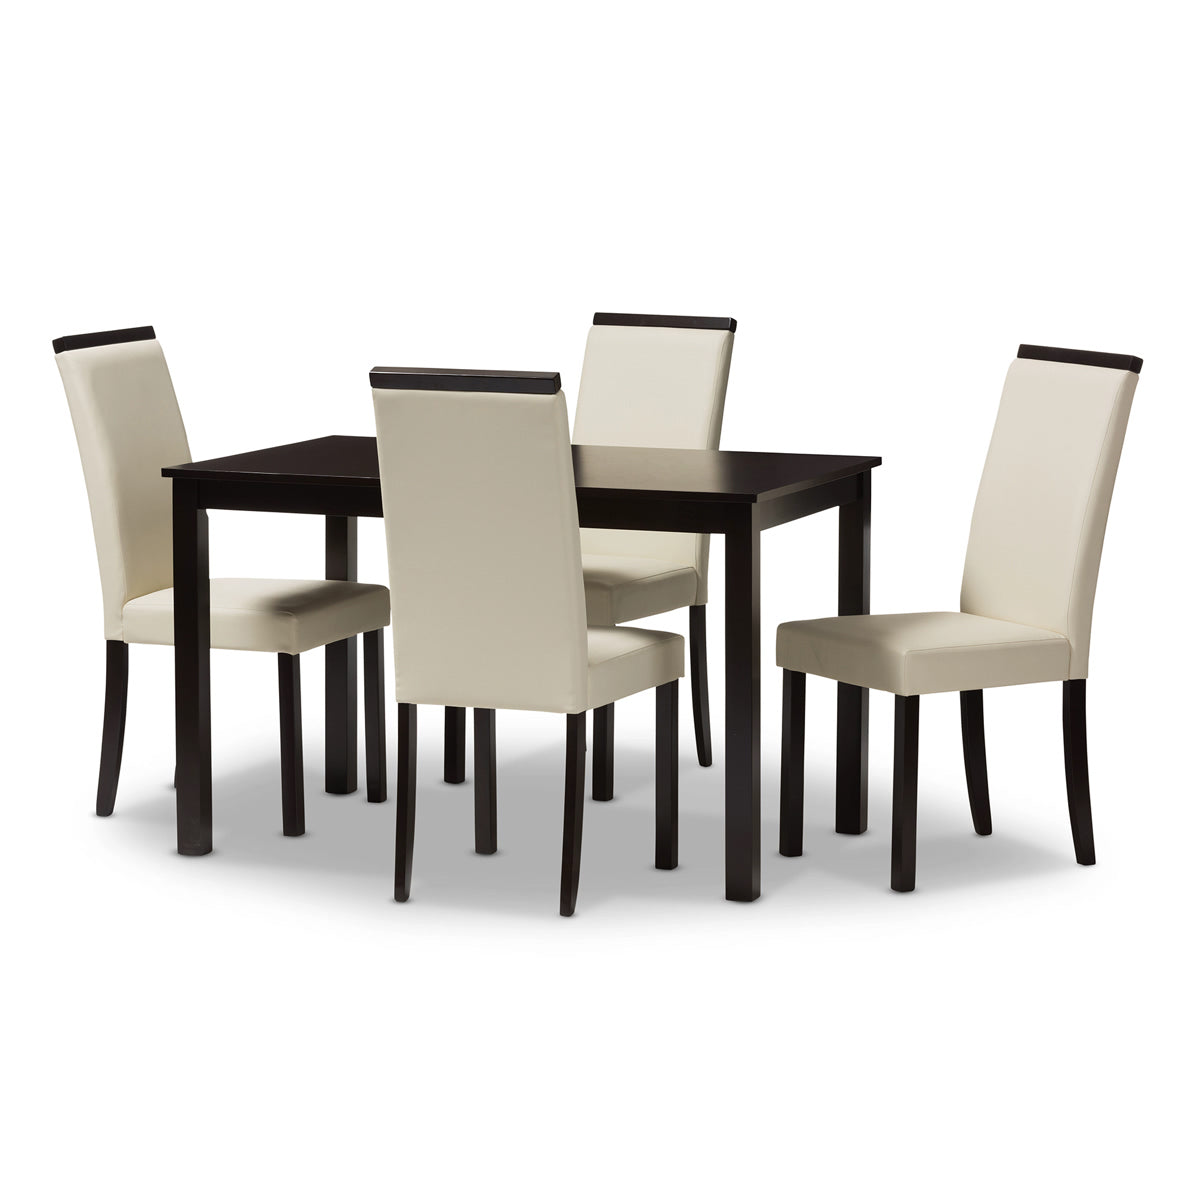 Baxton Studio Daveney Modern and Contemporary Cream Faux Leather Upholstered 5-Piece Dining Set Baxton Studio-0-Minimal And Modern - 1